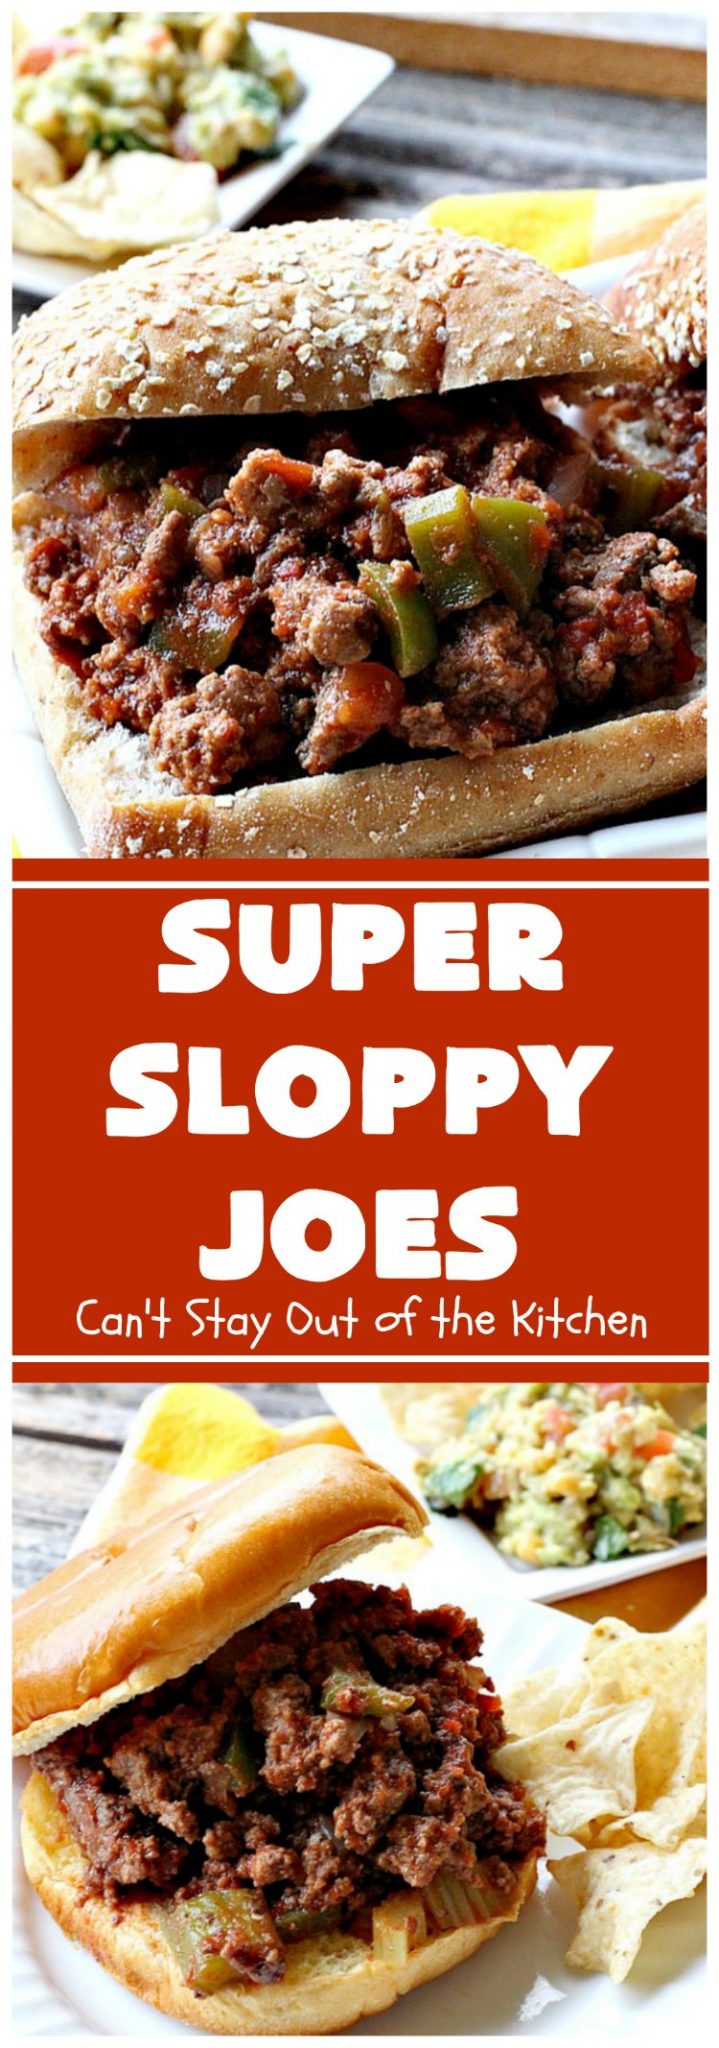 Super Sloppy Joes – Can't Stay Out of the Kitchen